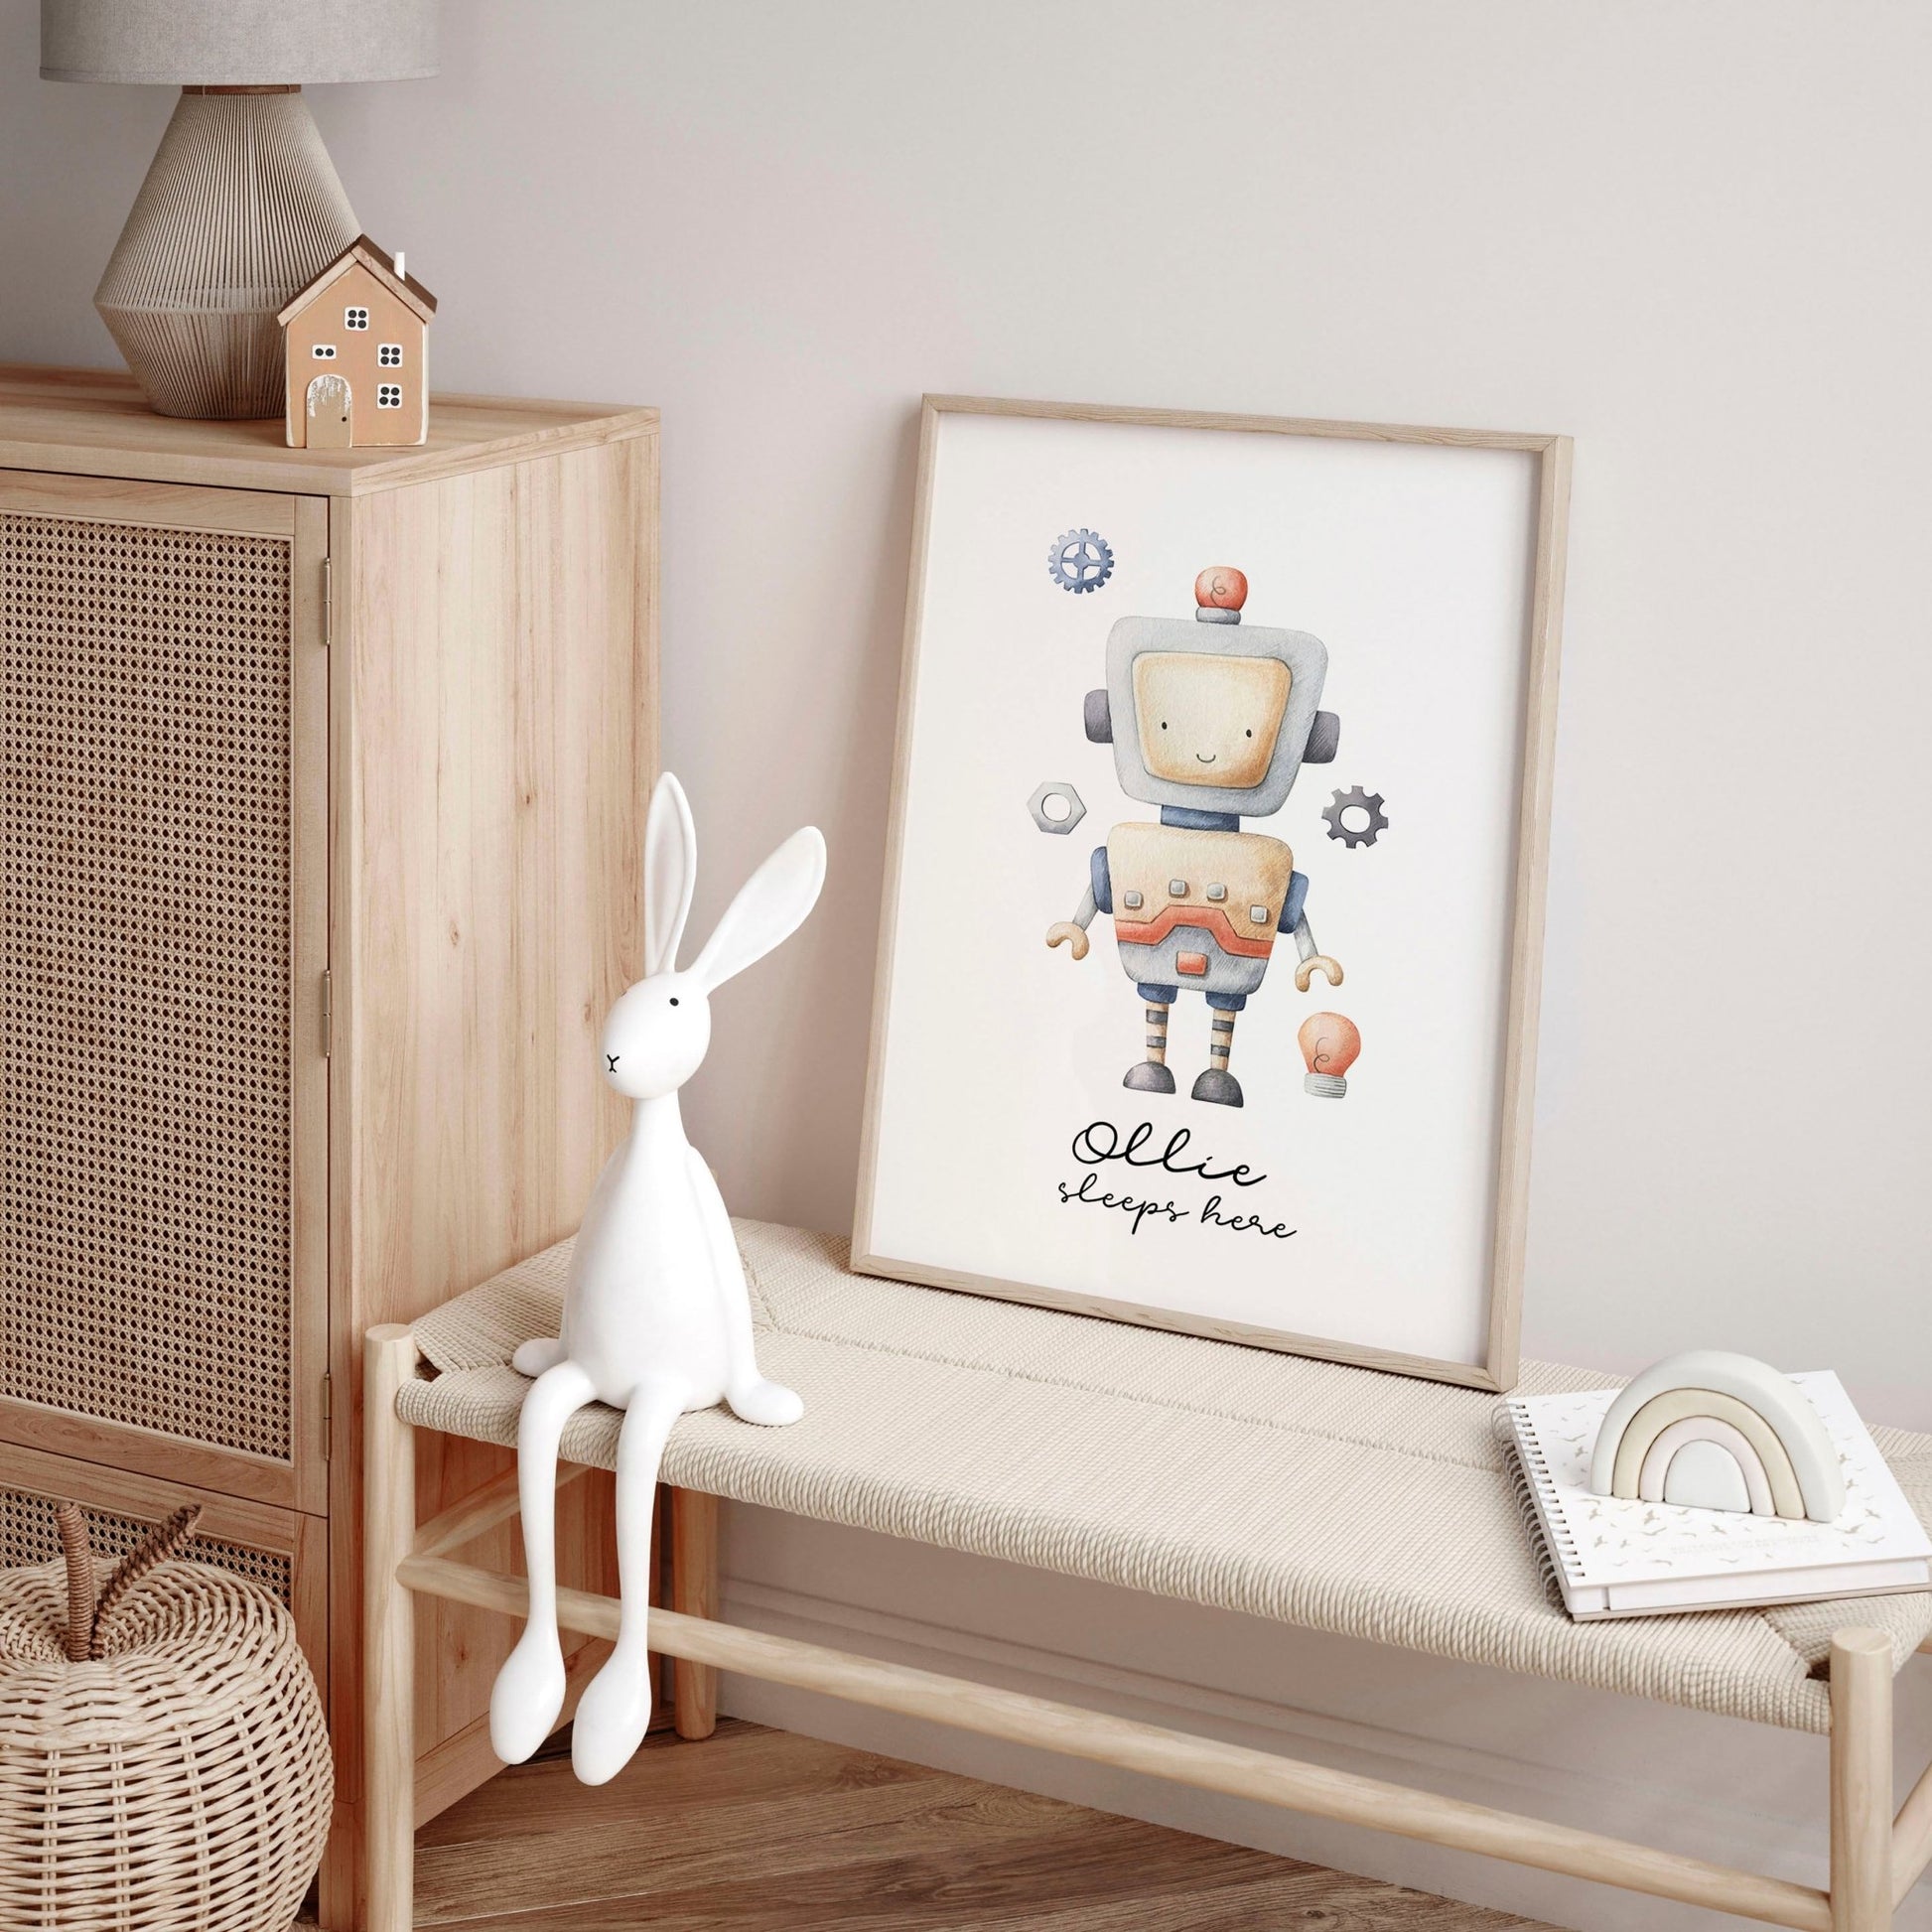 Nursery pictures for wall | wall art print